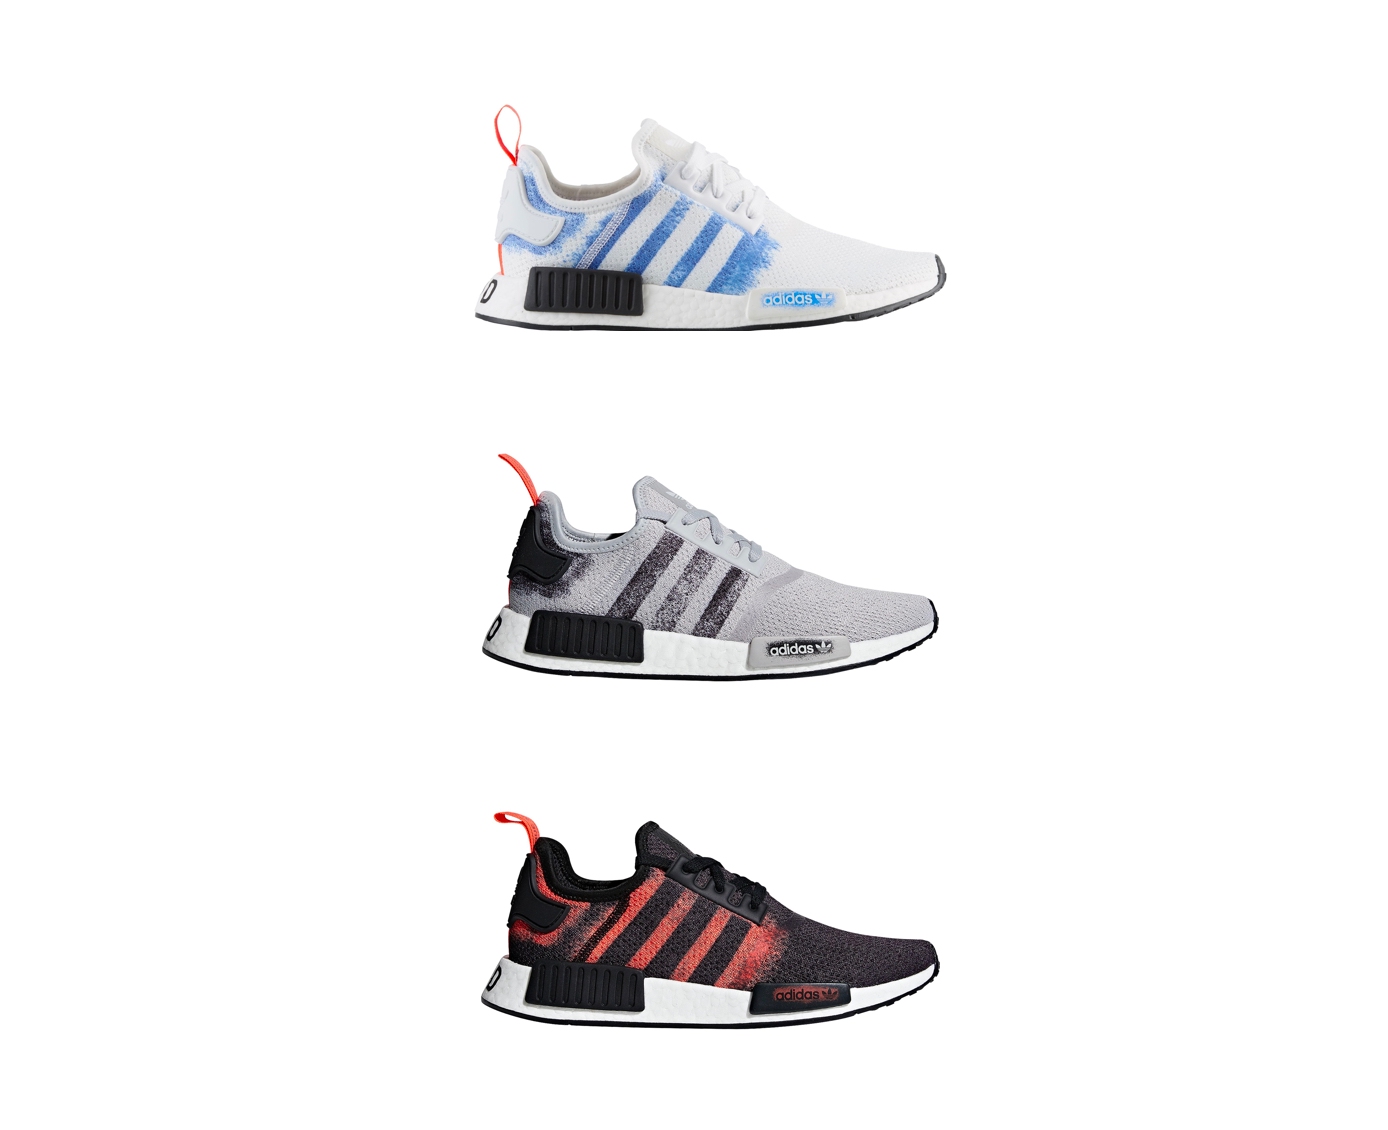 nmd stencil white and blue